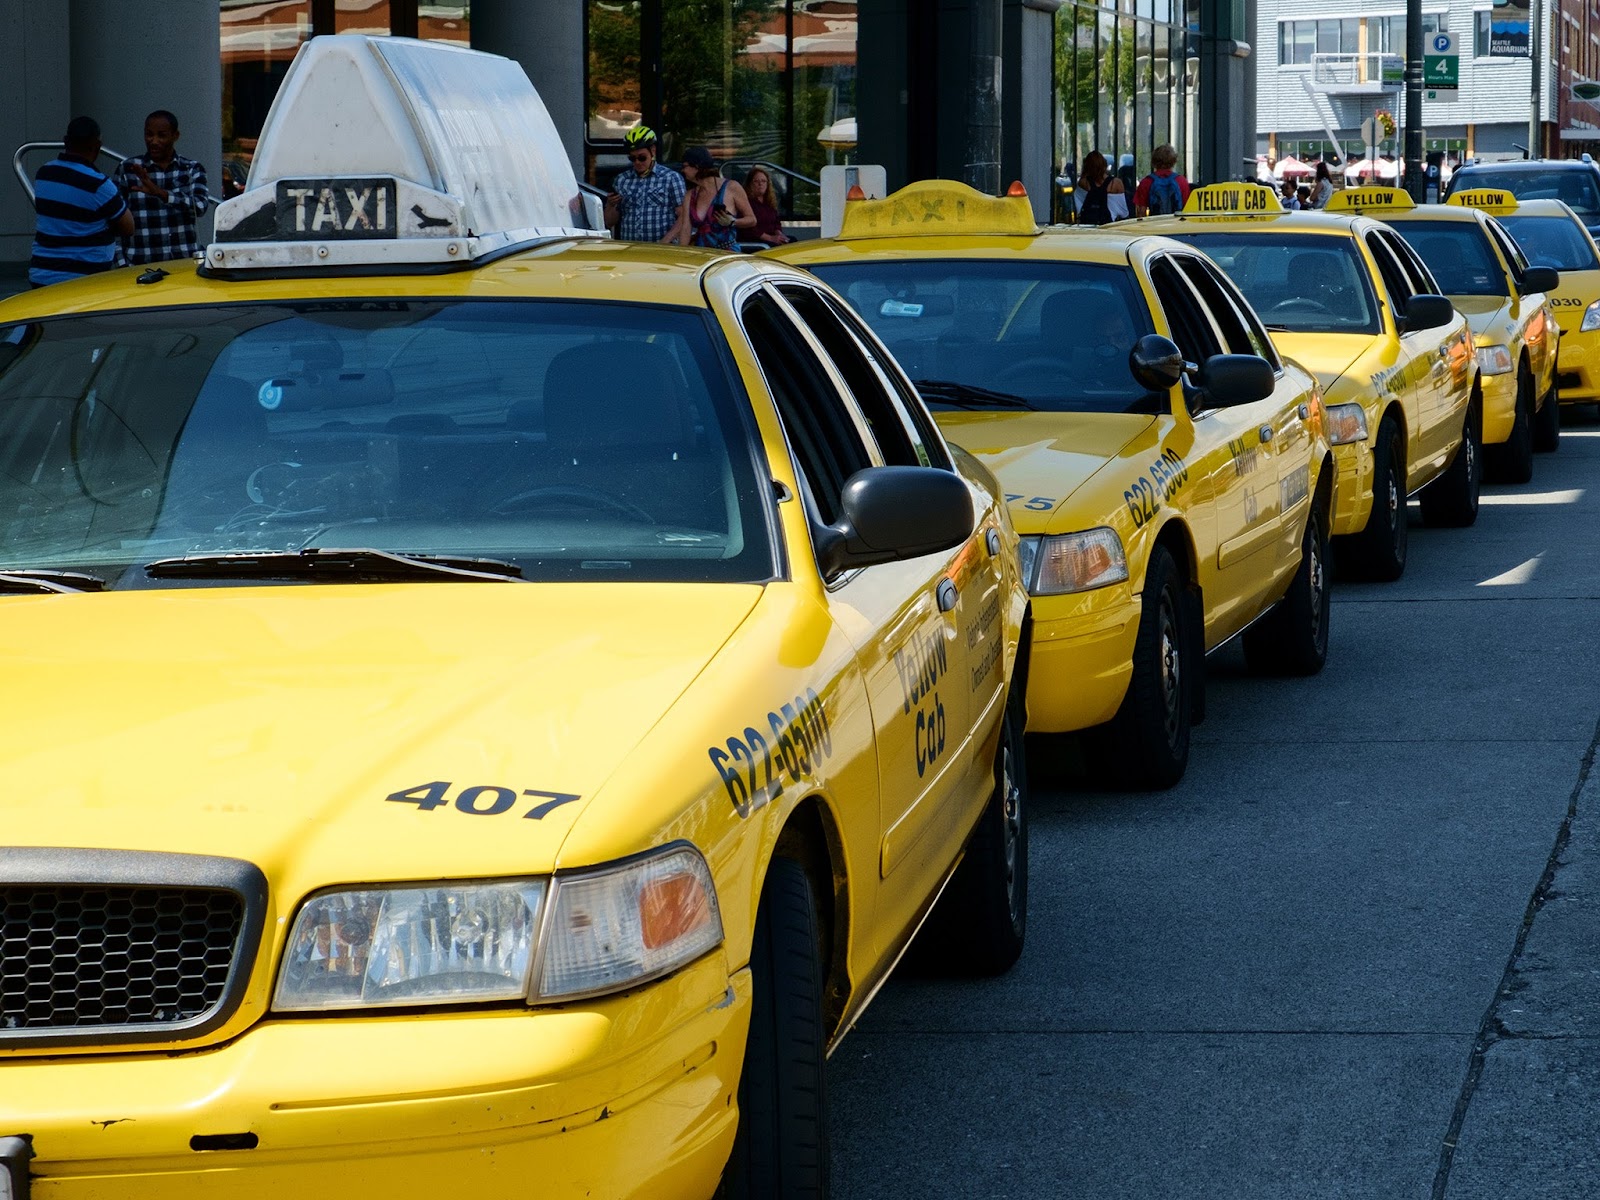 Many people like using the taxi service owing to its luxury, elegance, and courtesy. Taxi, driver is one of the best graveyard shift jobs near me